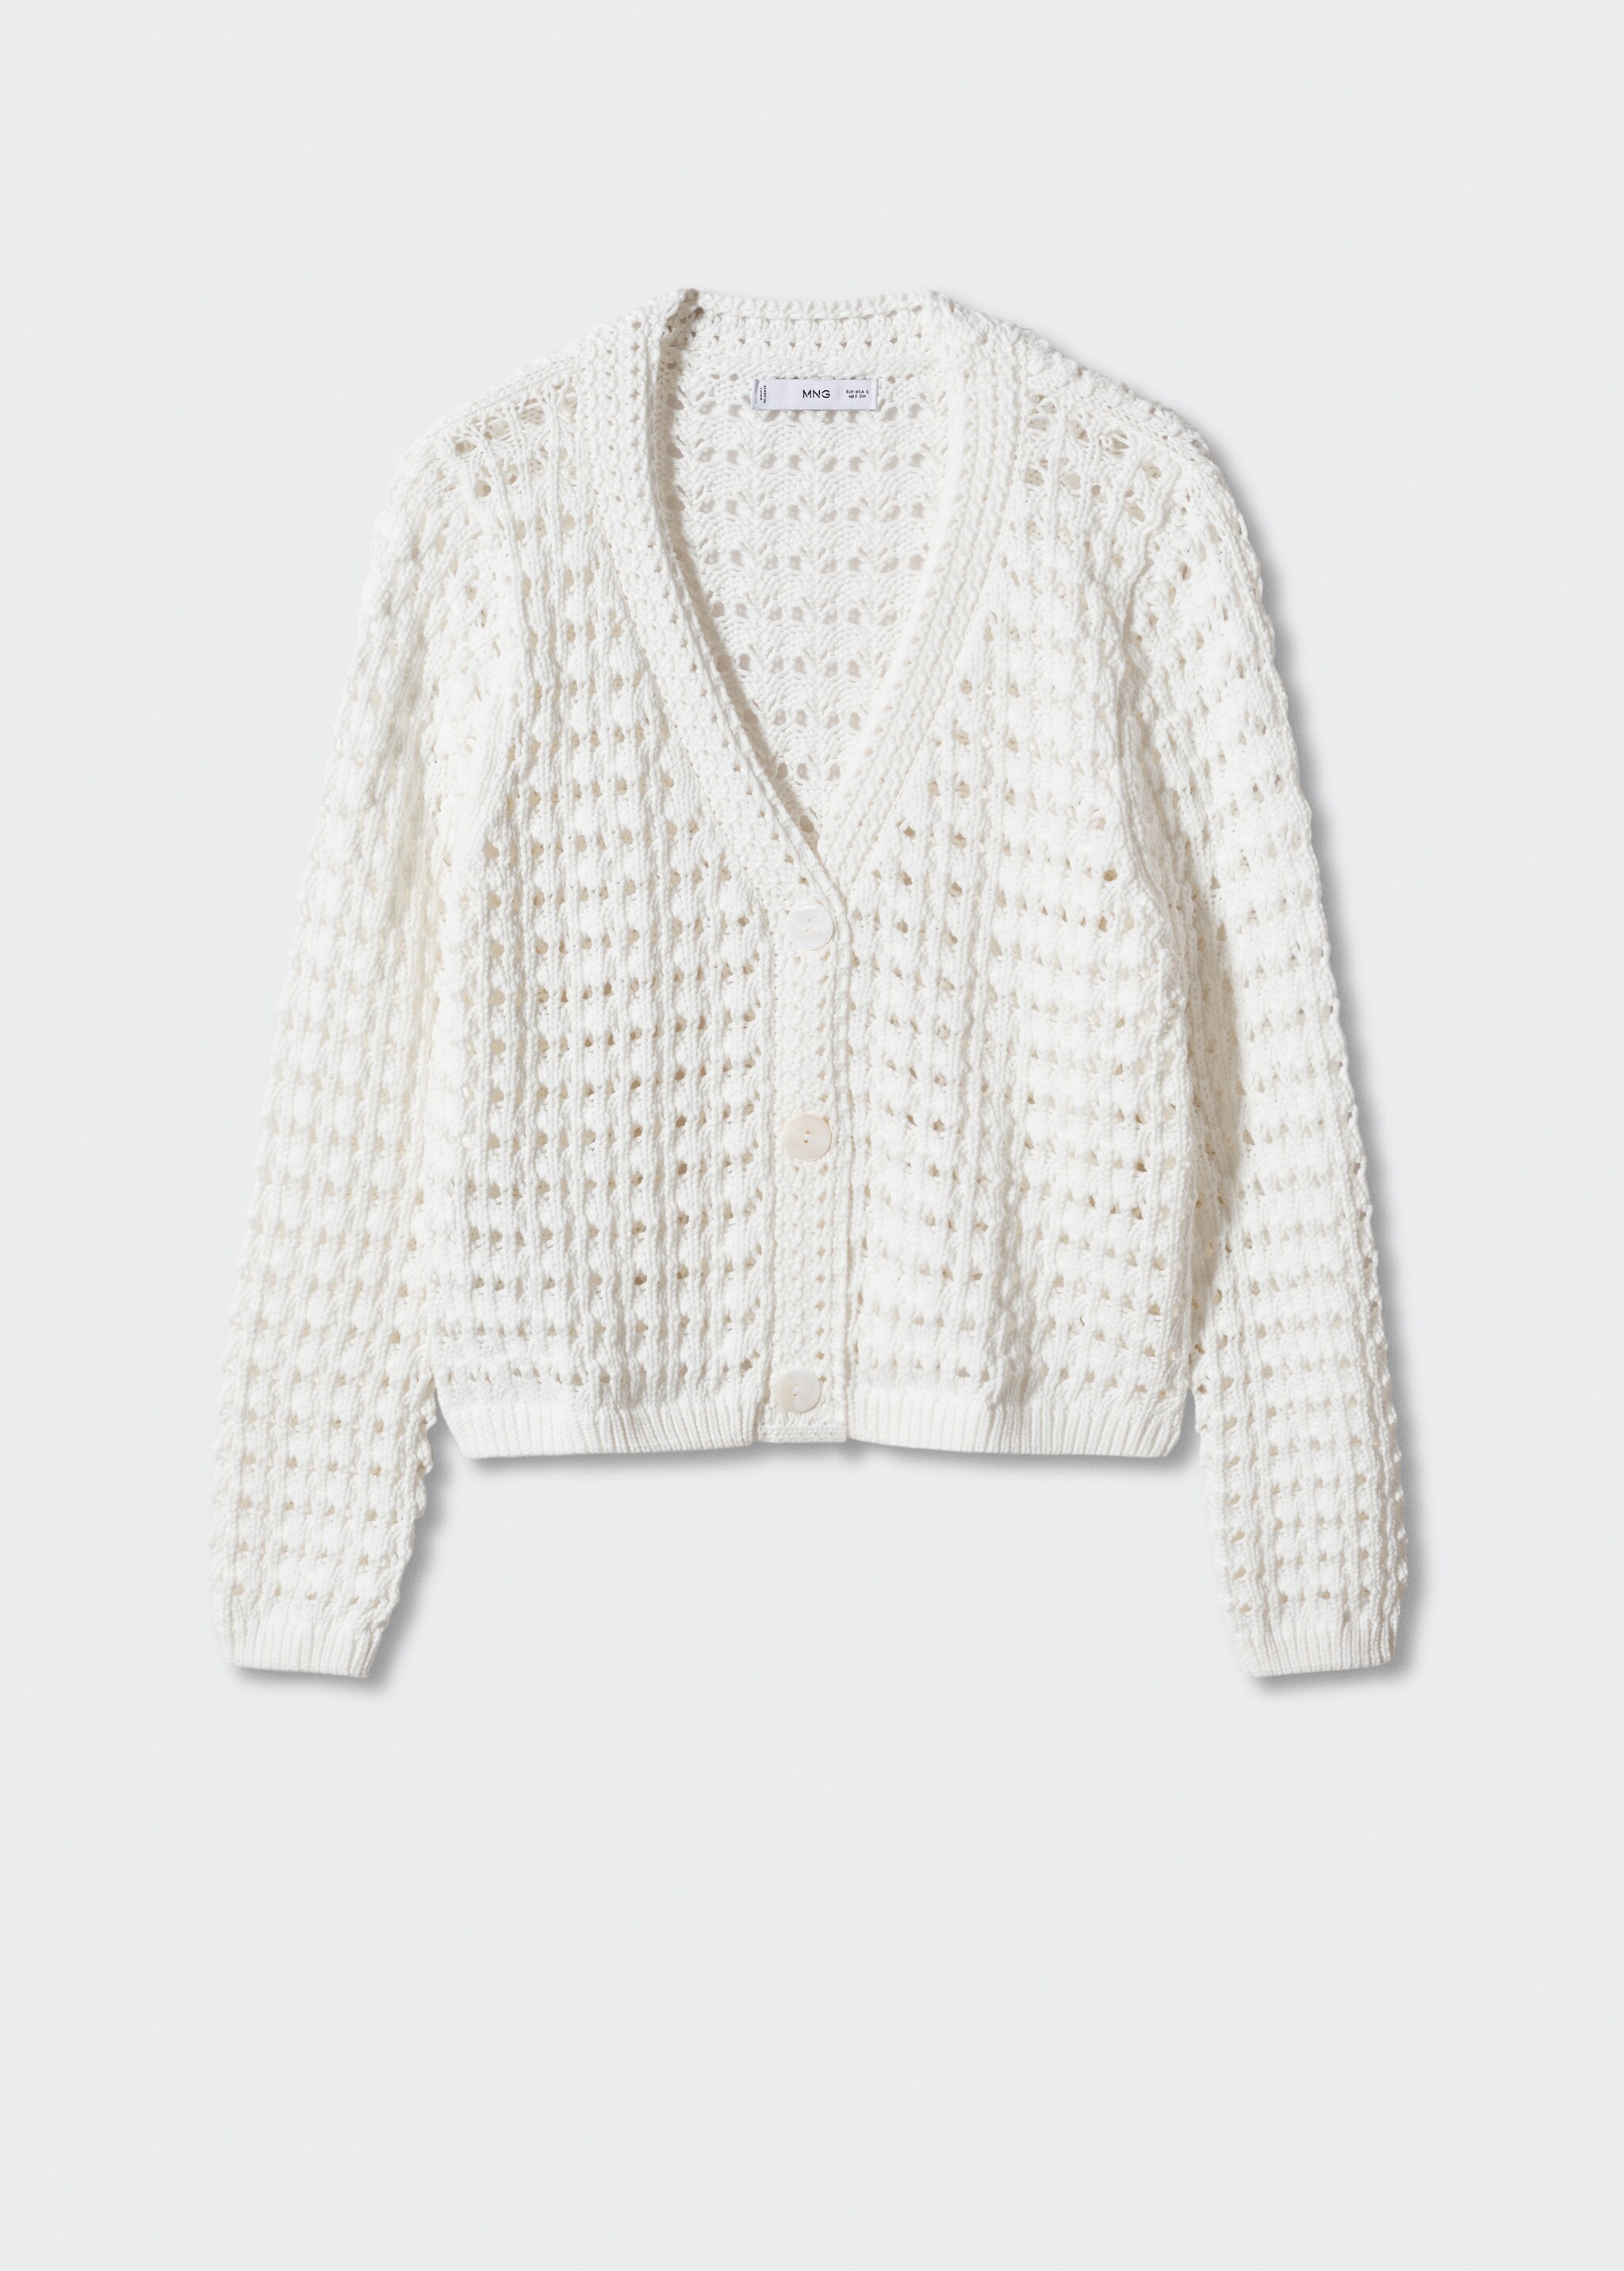 Openwork knit cardigan - Article without model